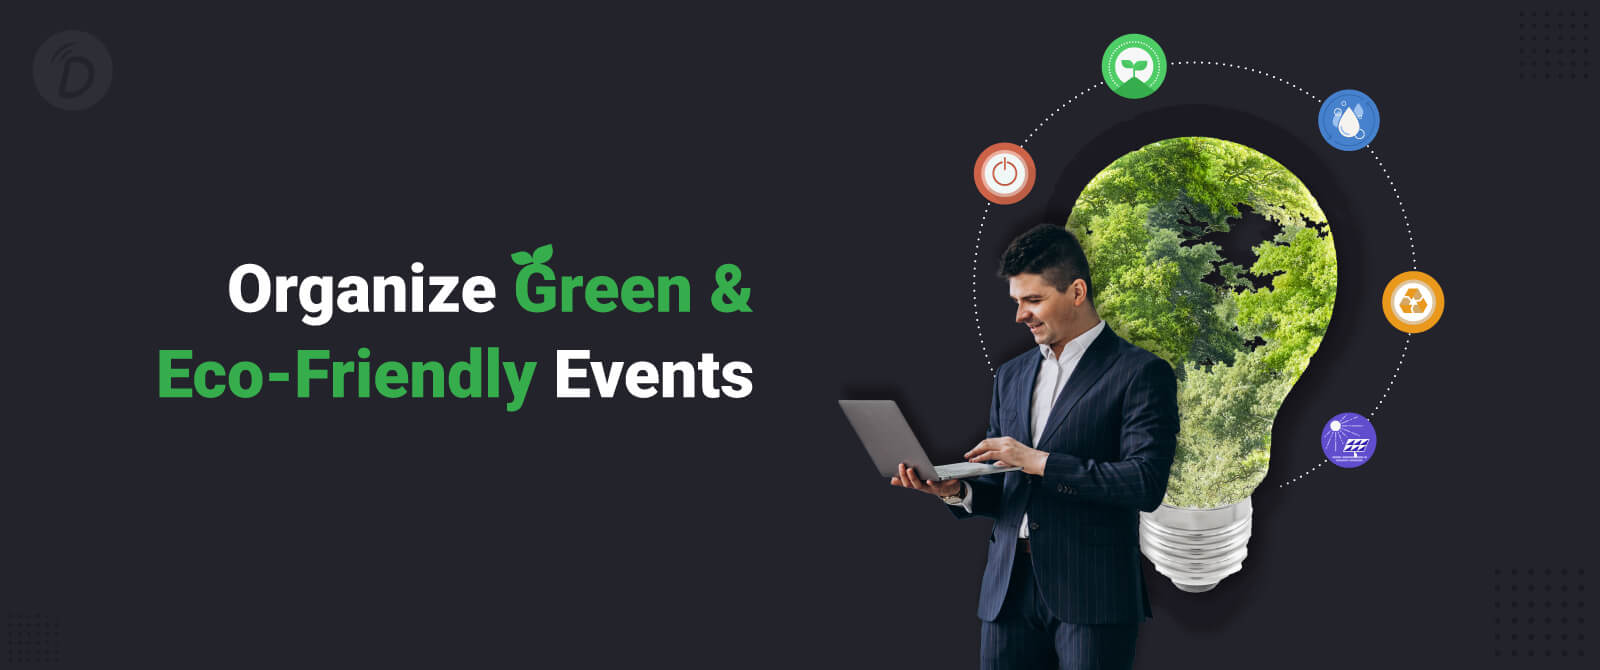 How to Make Your Events More Eco-Friendly & Sustainable?